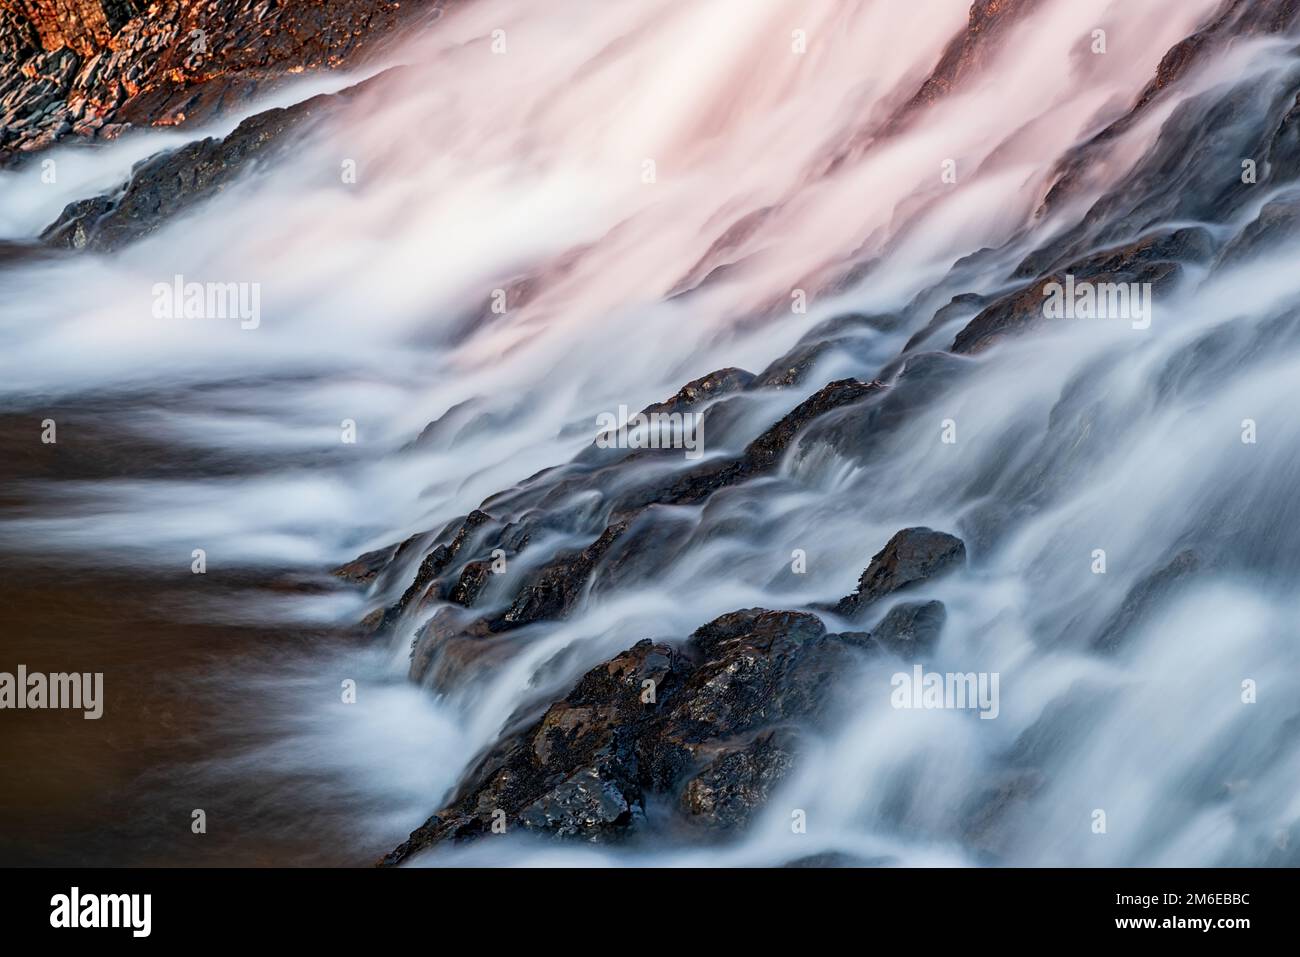 Little waterfall in the mountains, Iceland Stock Photo